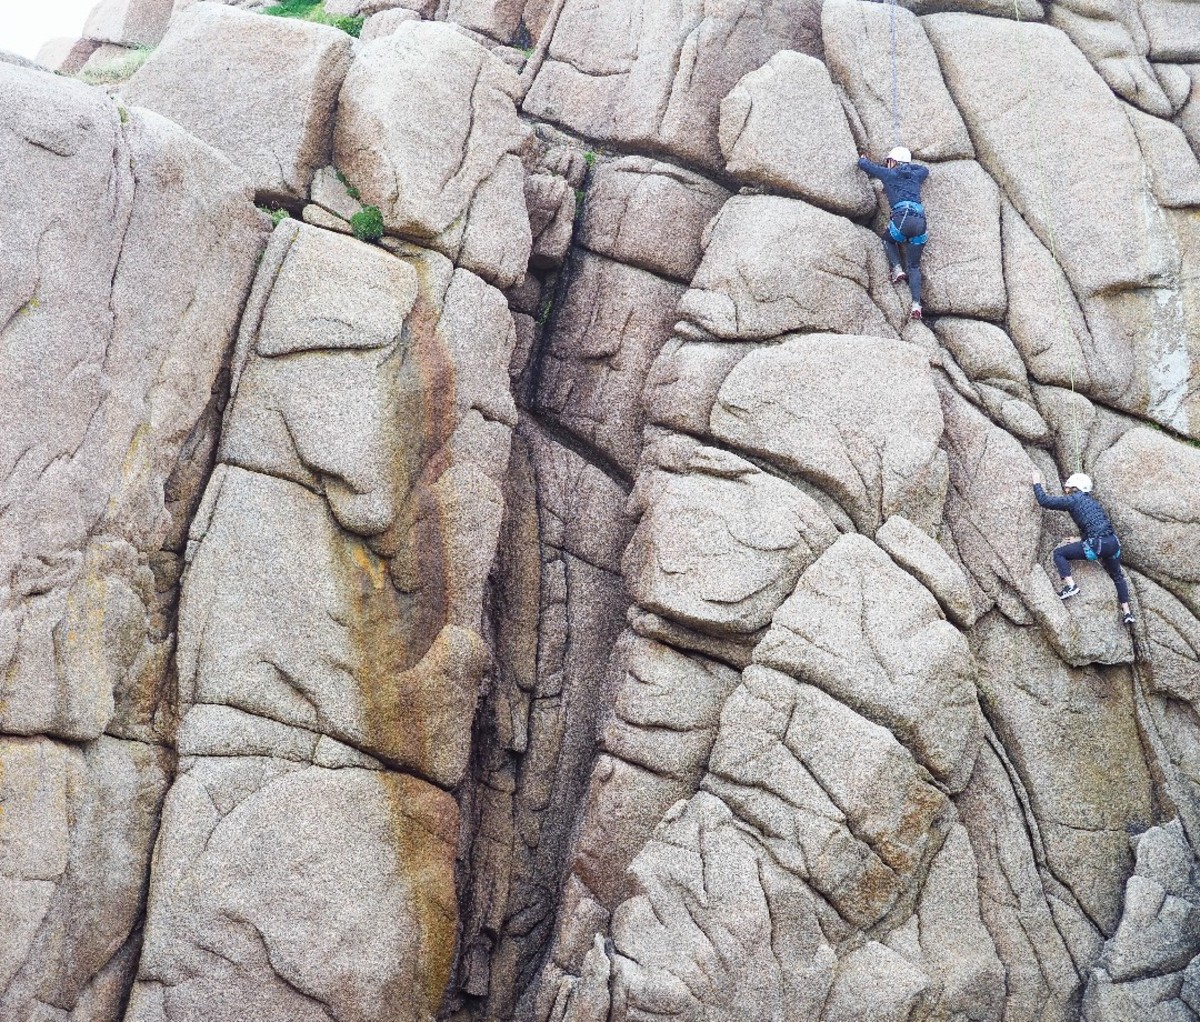 Climbers on a rock wall in Ireland